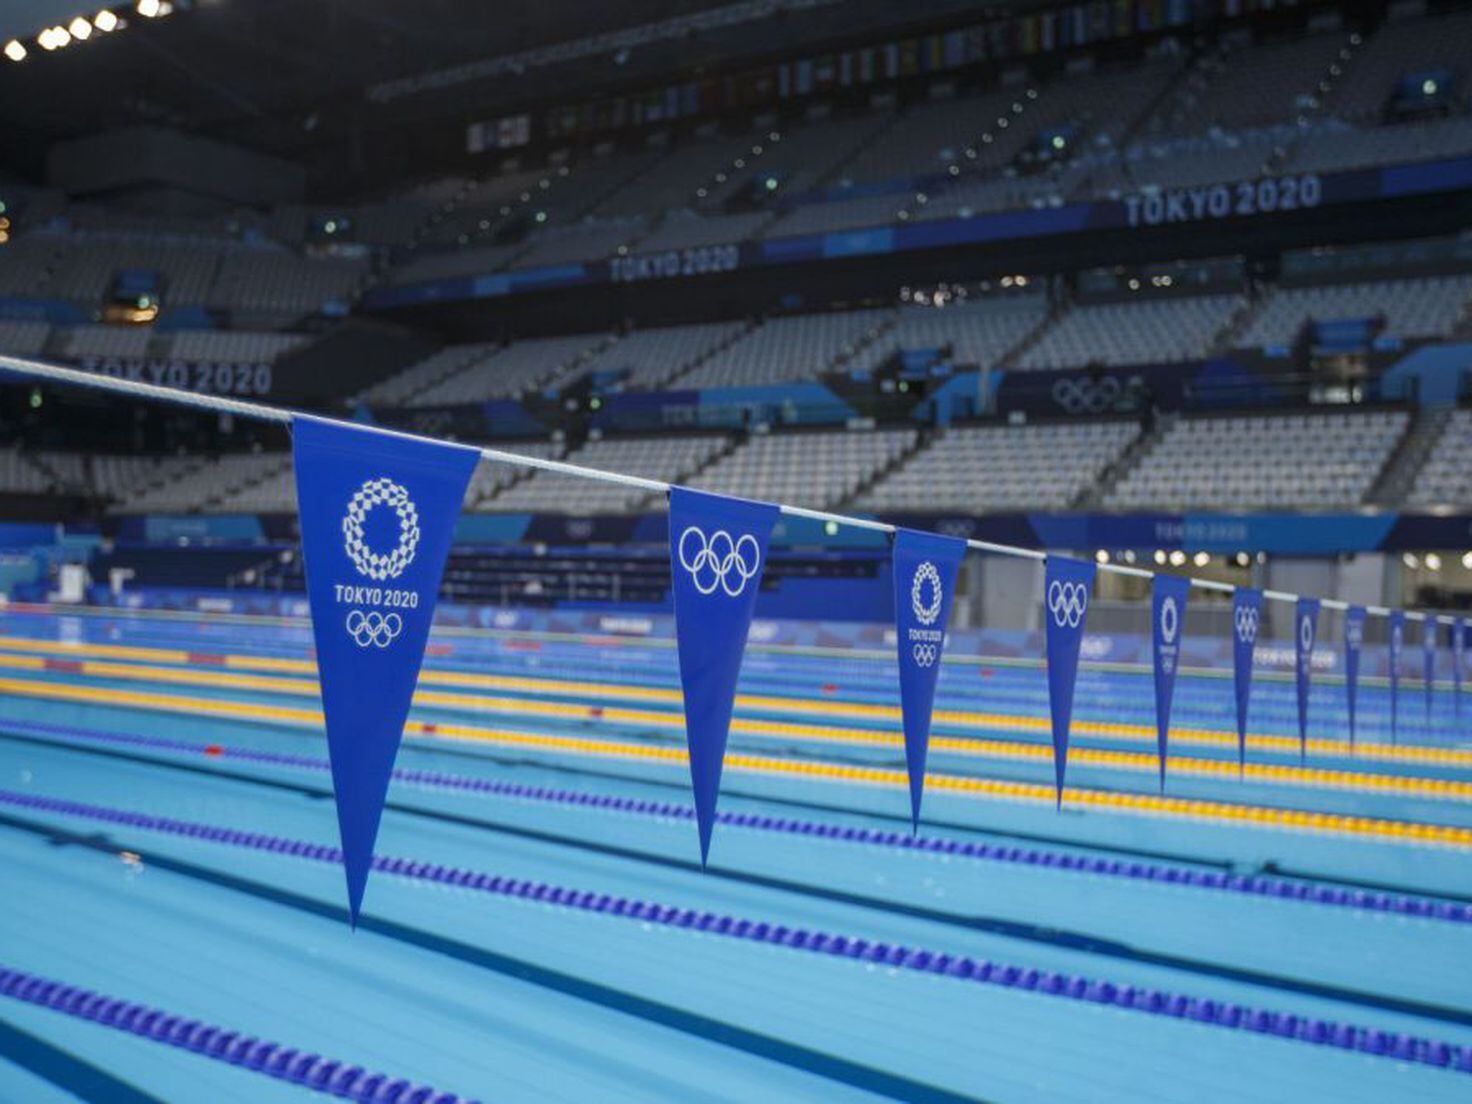 Pool Size Comparison: Olympic Size, 25 Meter & 25 Yard